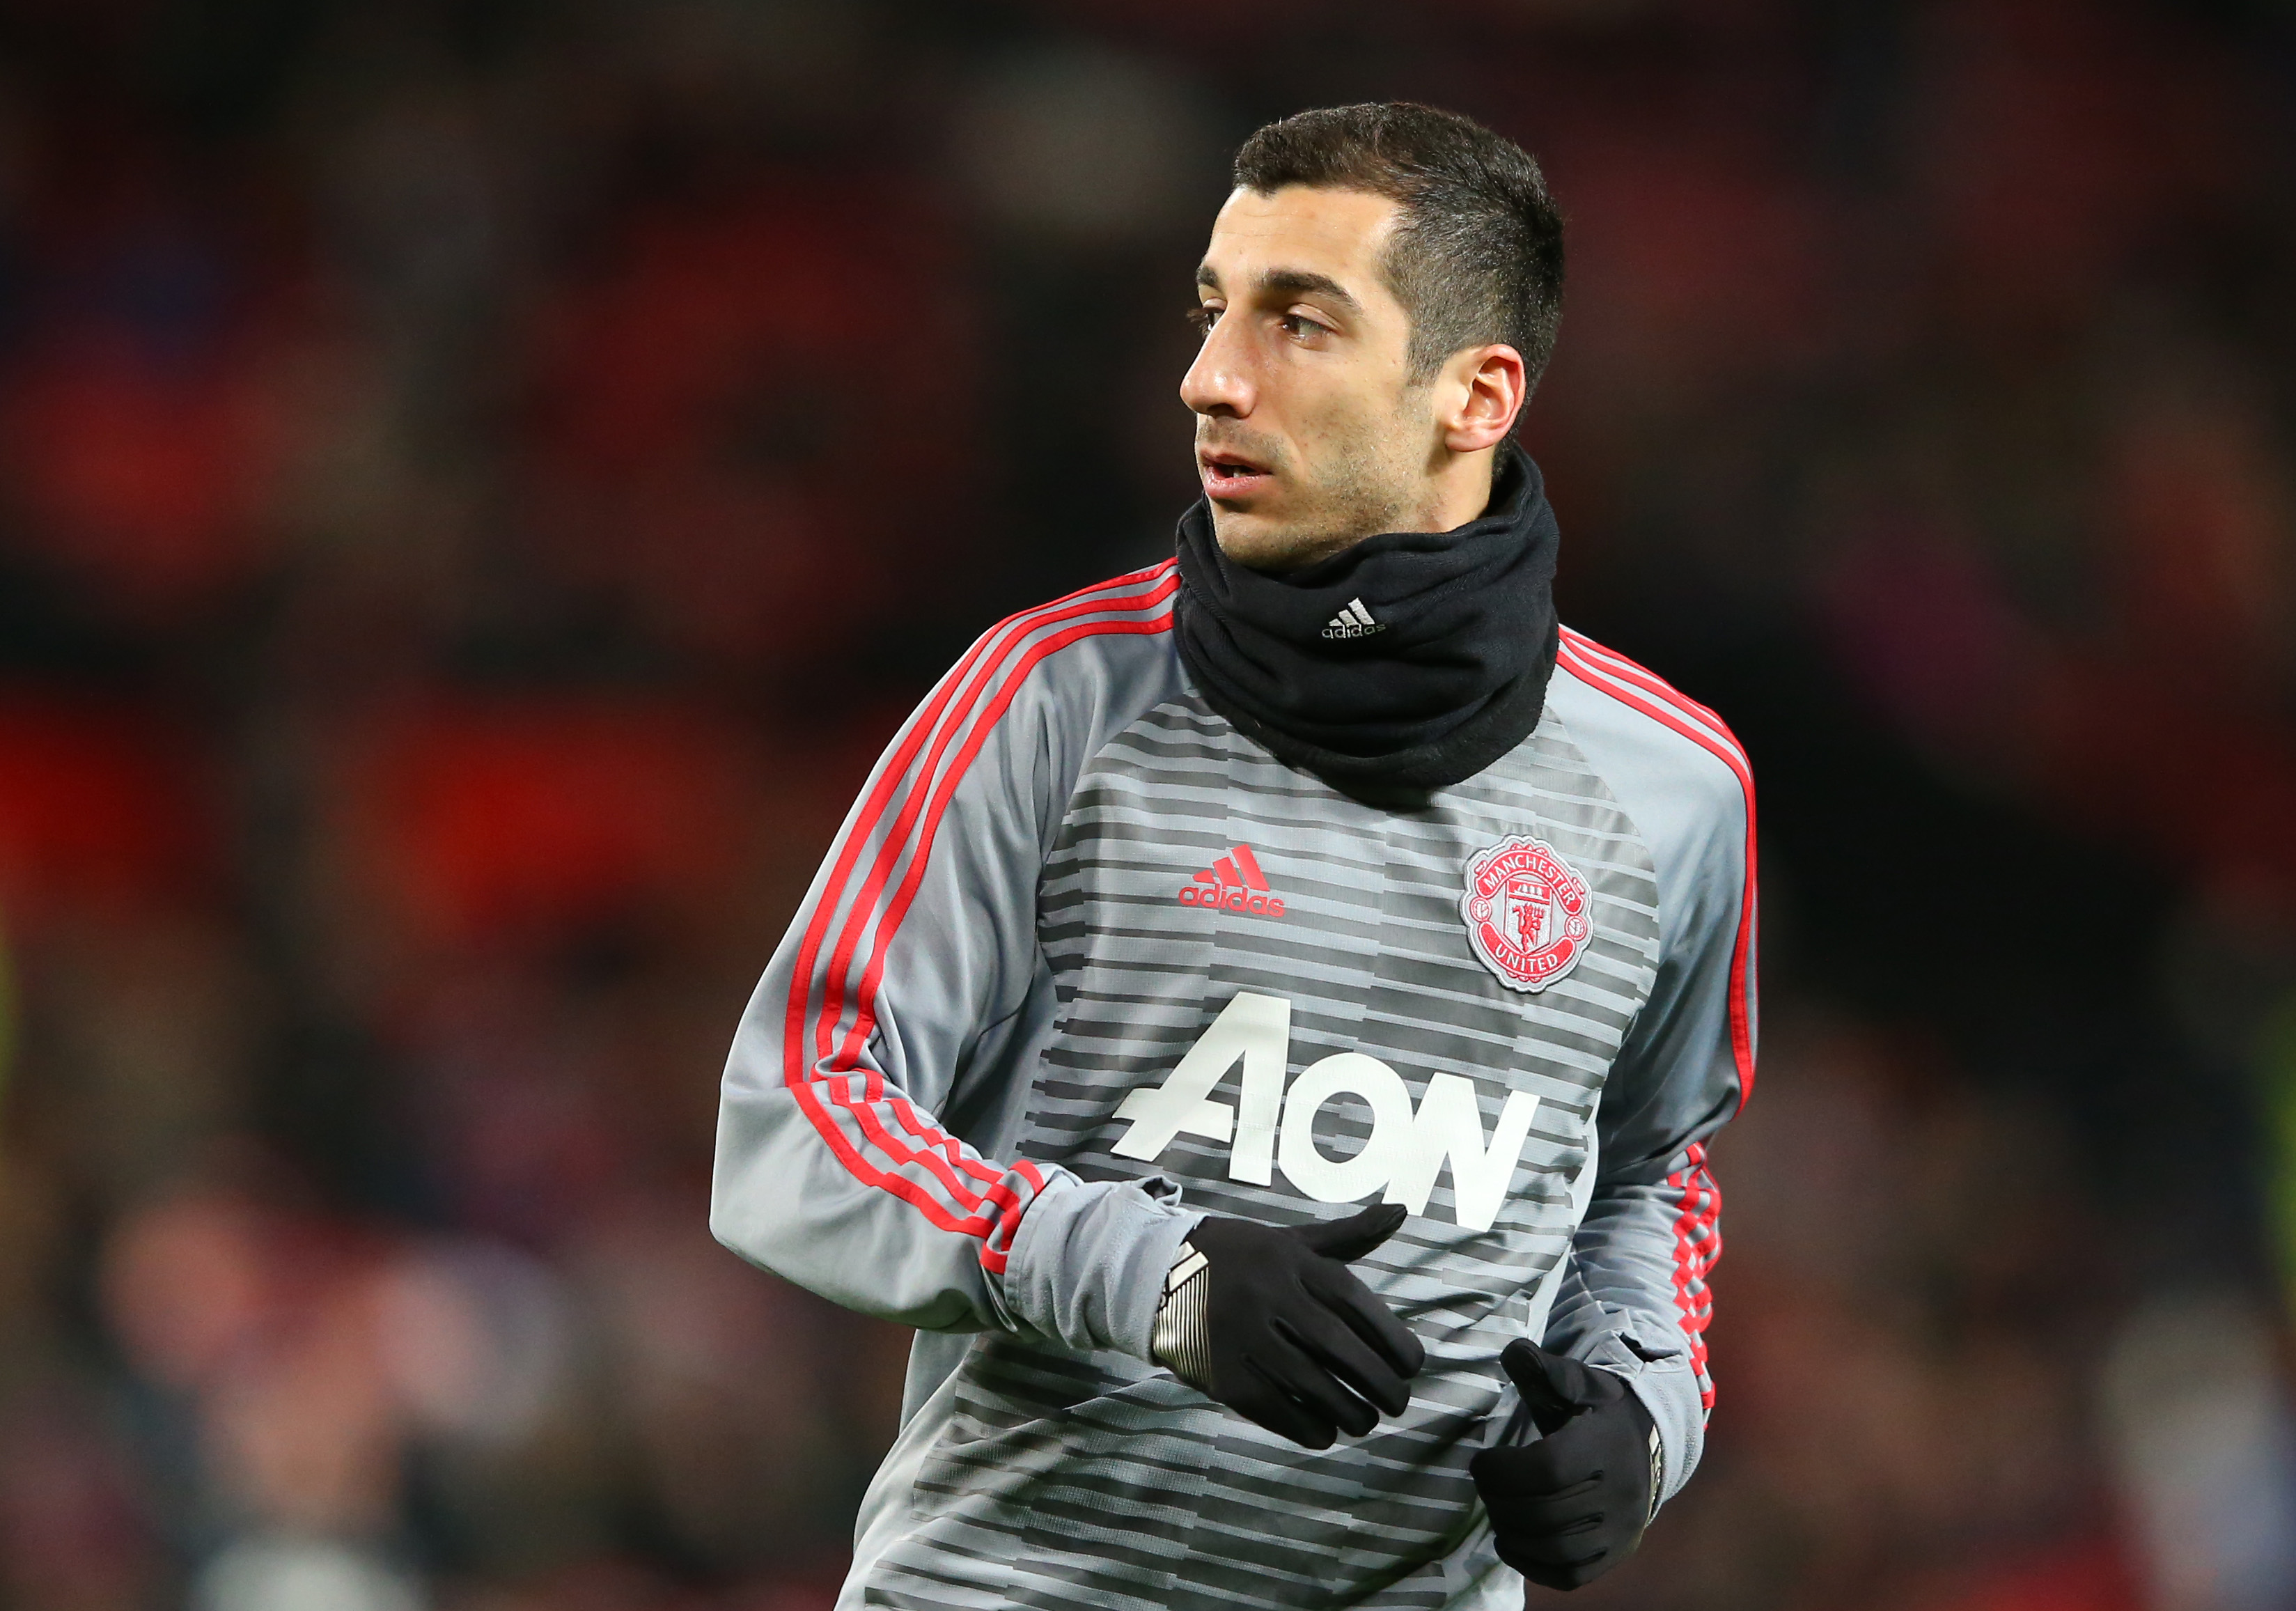 MANCHESTER, ENGLAND - DECEMBER 30:  Henrikh Mkhitaryan of Manchester United warms up prior to the Premier League match between Manchester United and Southampton at Old Trafford on December 30, 2017 in Manchester, England.  (Photo by Alex Livesey/Getty Images)